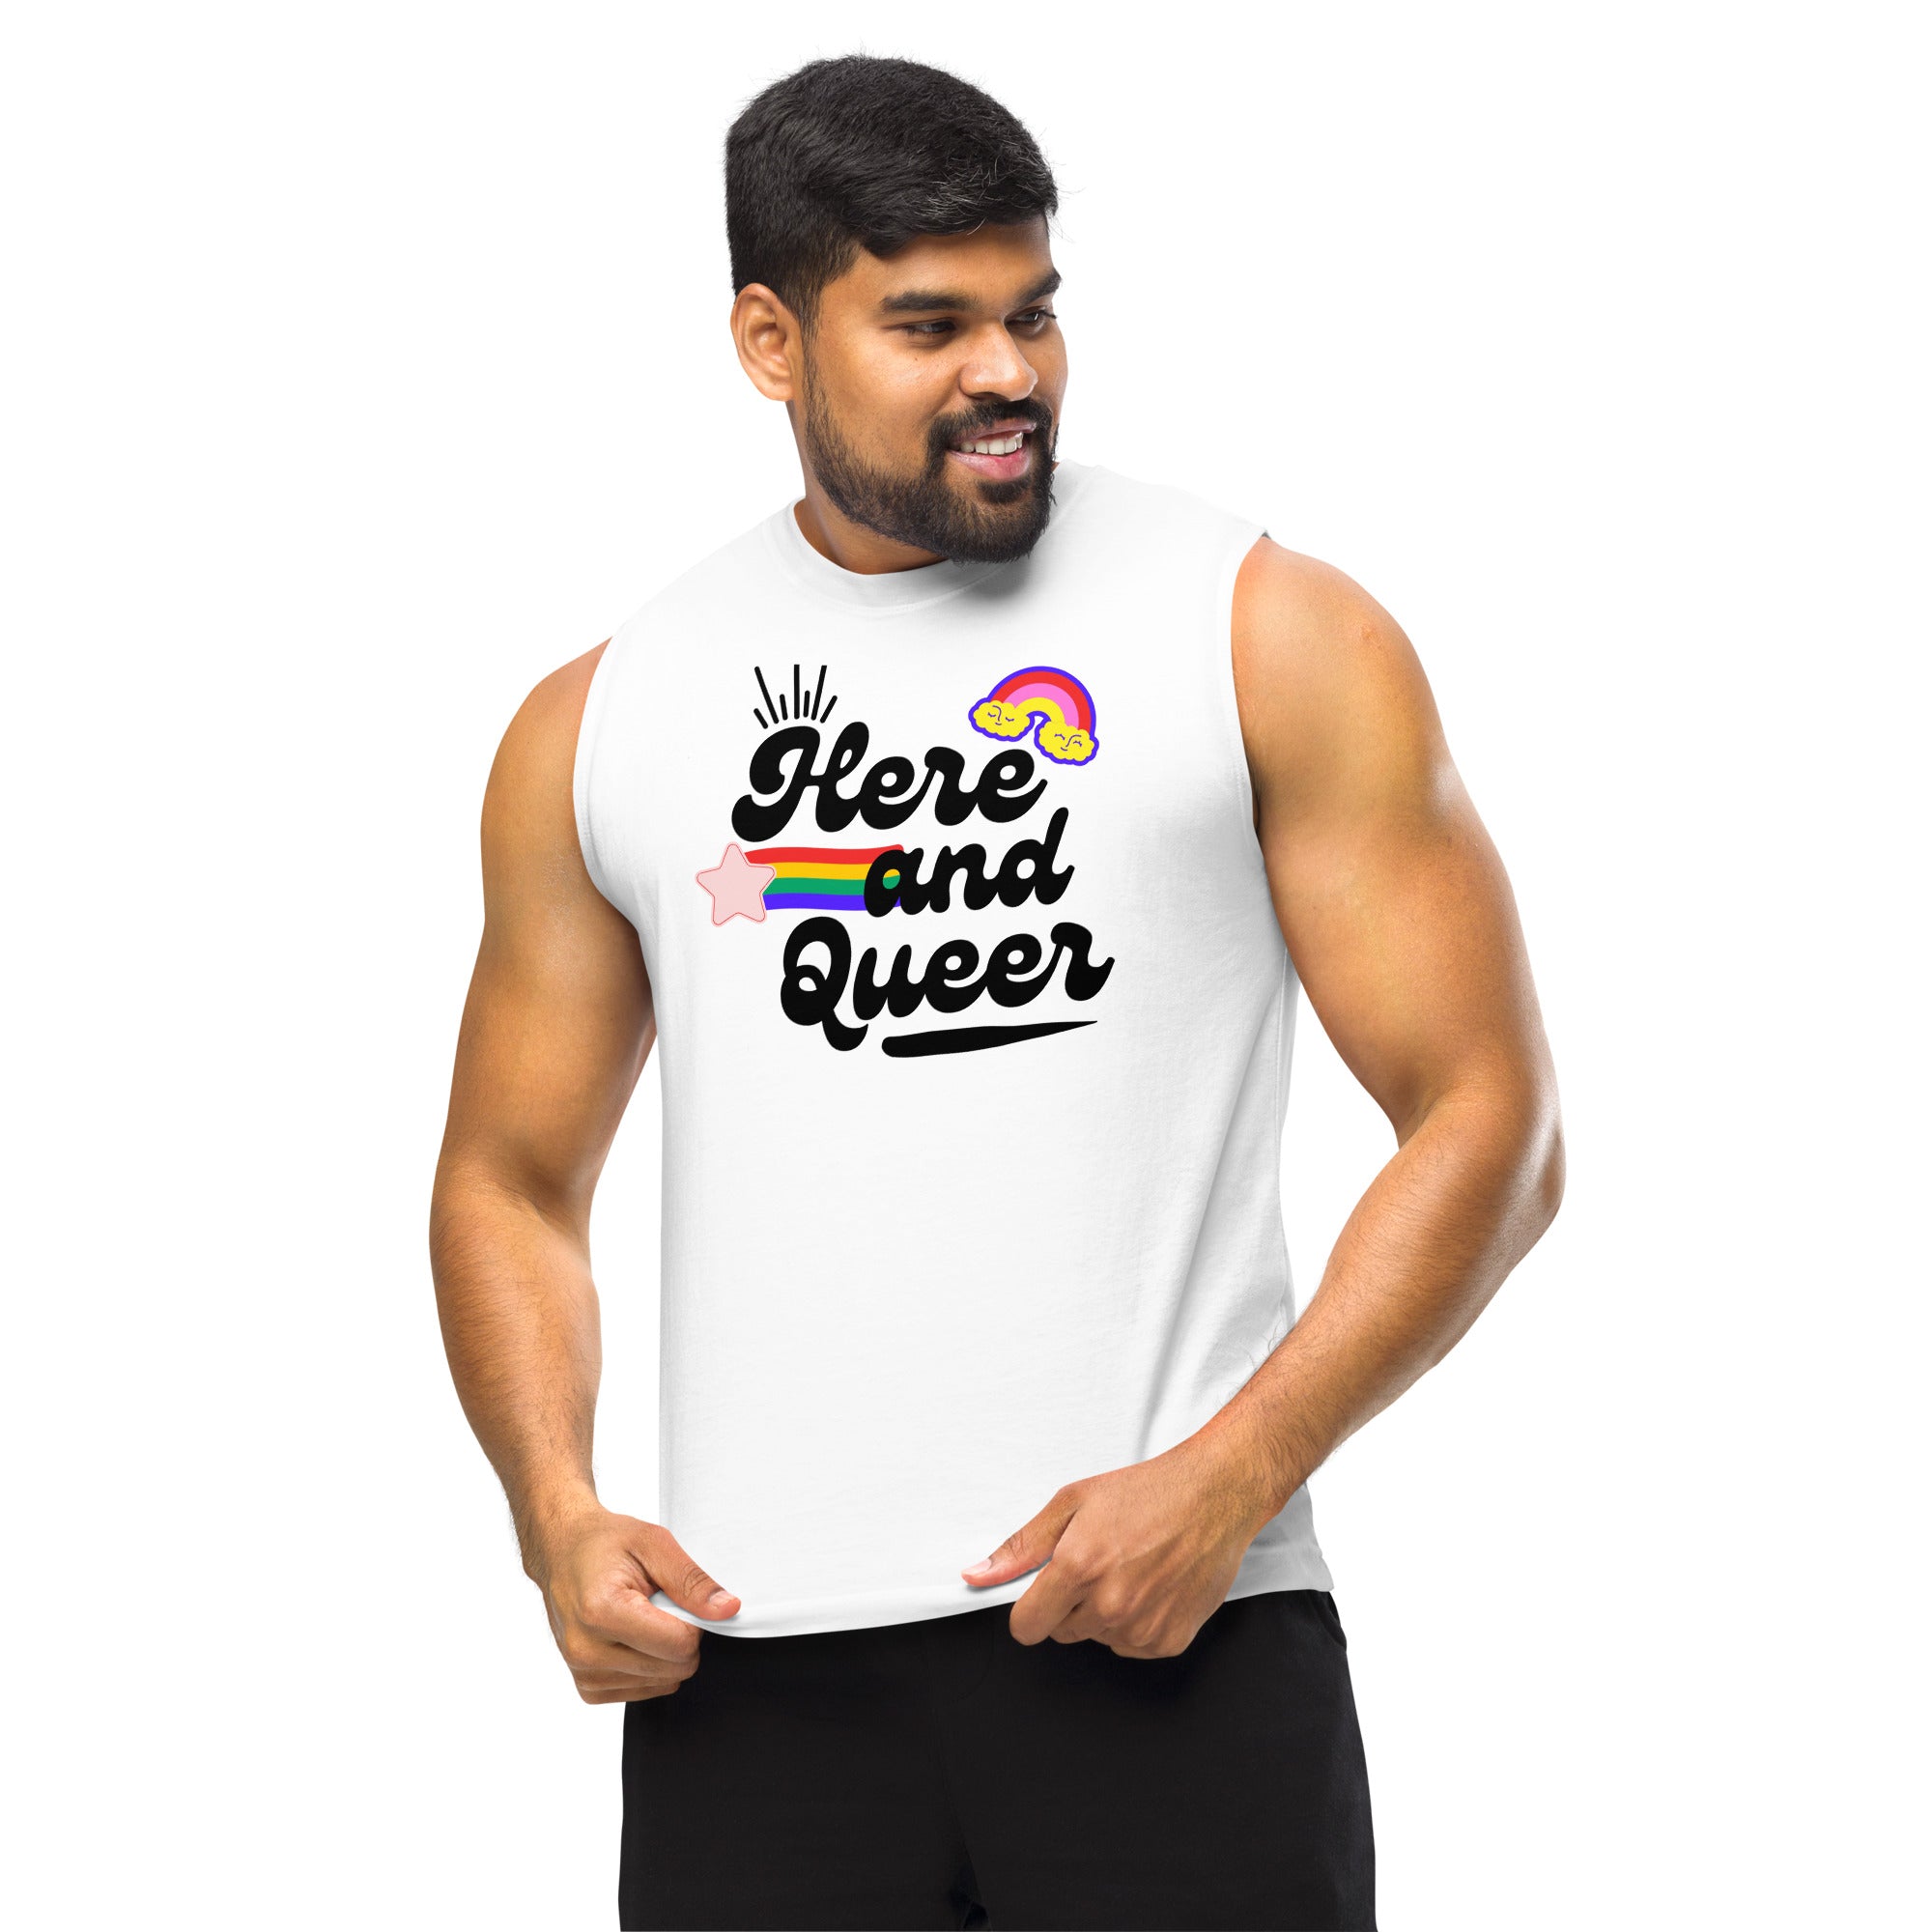 Here and Queer - Unisex Muscle Shirt